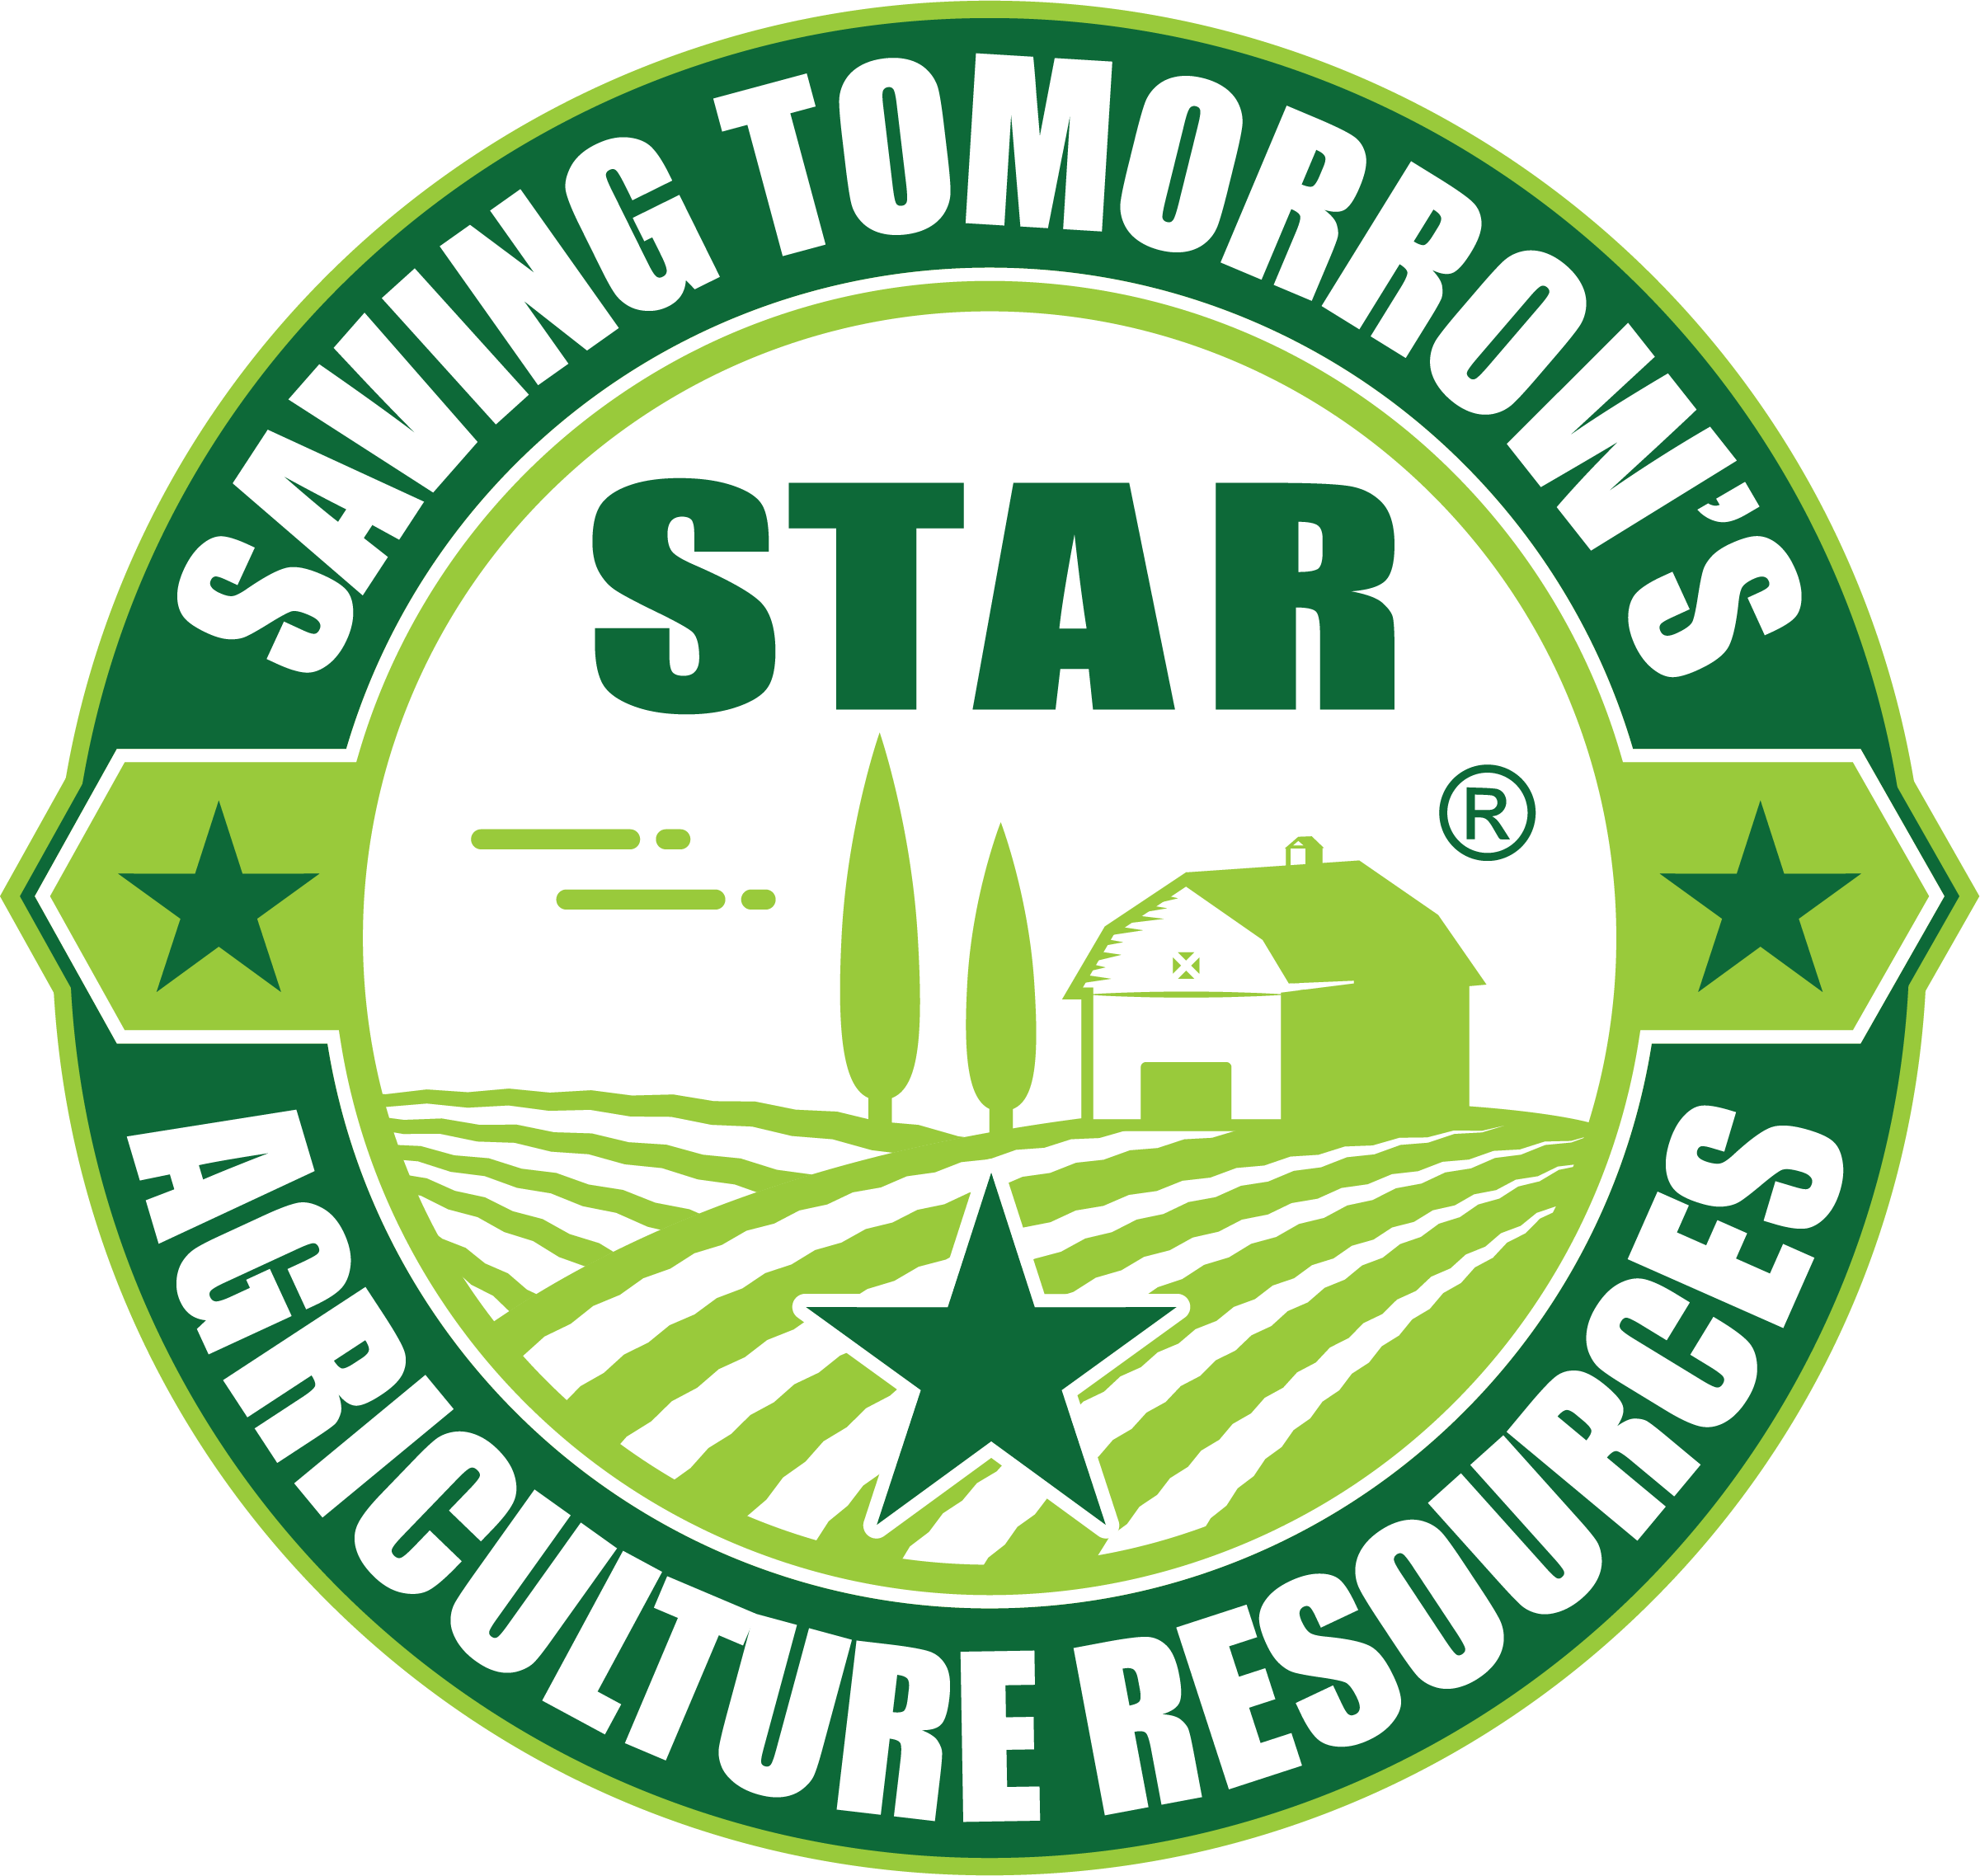 The STAR logo reads "Saving Tomorrow's Agricultural Resources" in a circle. With a drawn image of a farm and barn within the circle. 